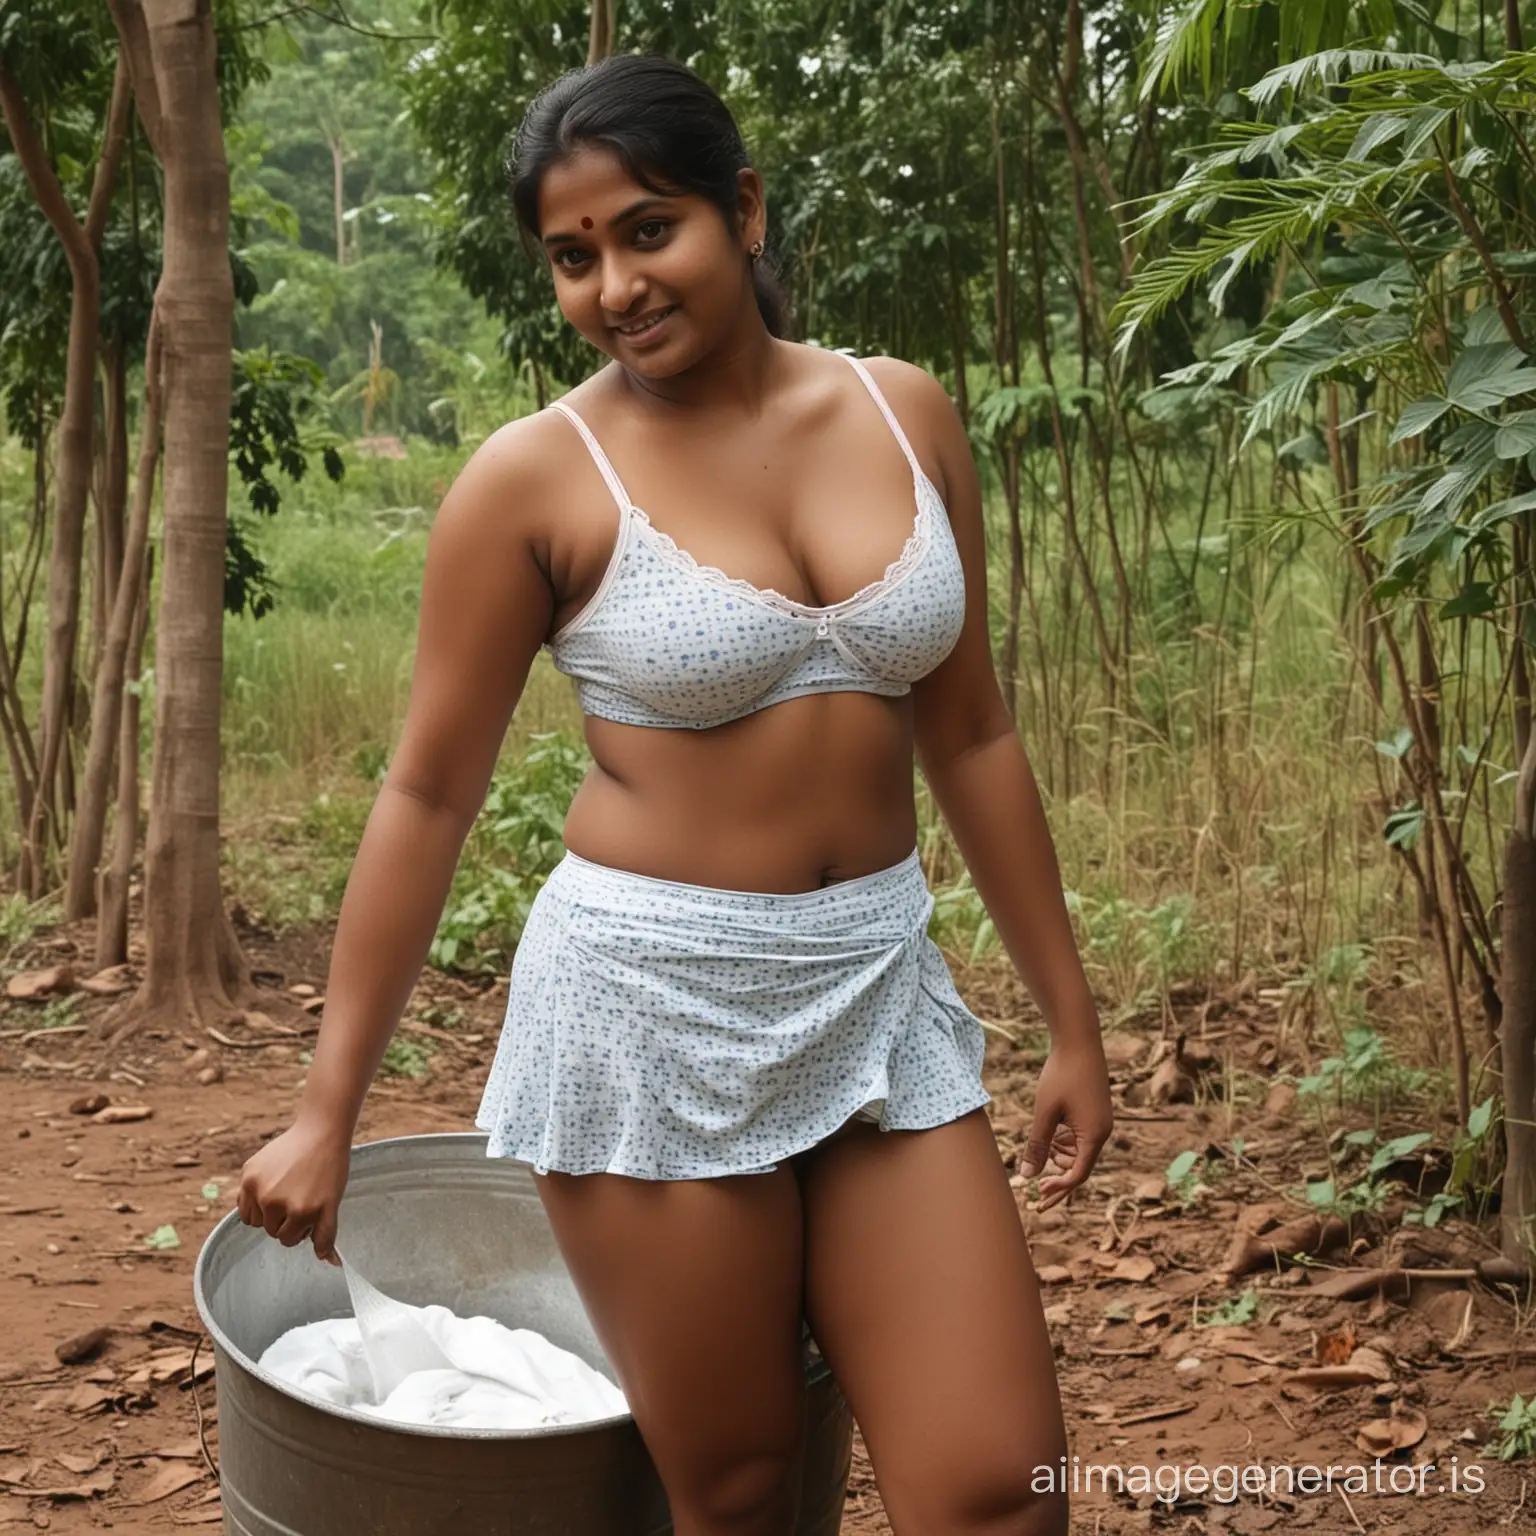 Desi fat dark skinned Indian Housewife doing chores in outdoors qith friends wearing underwear